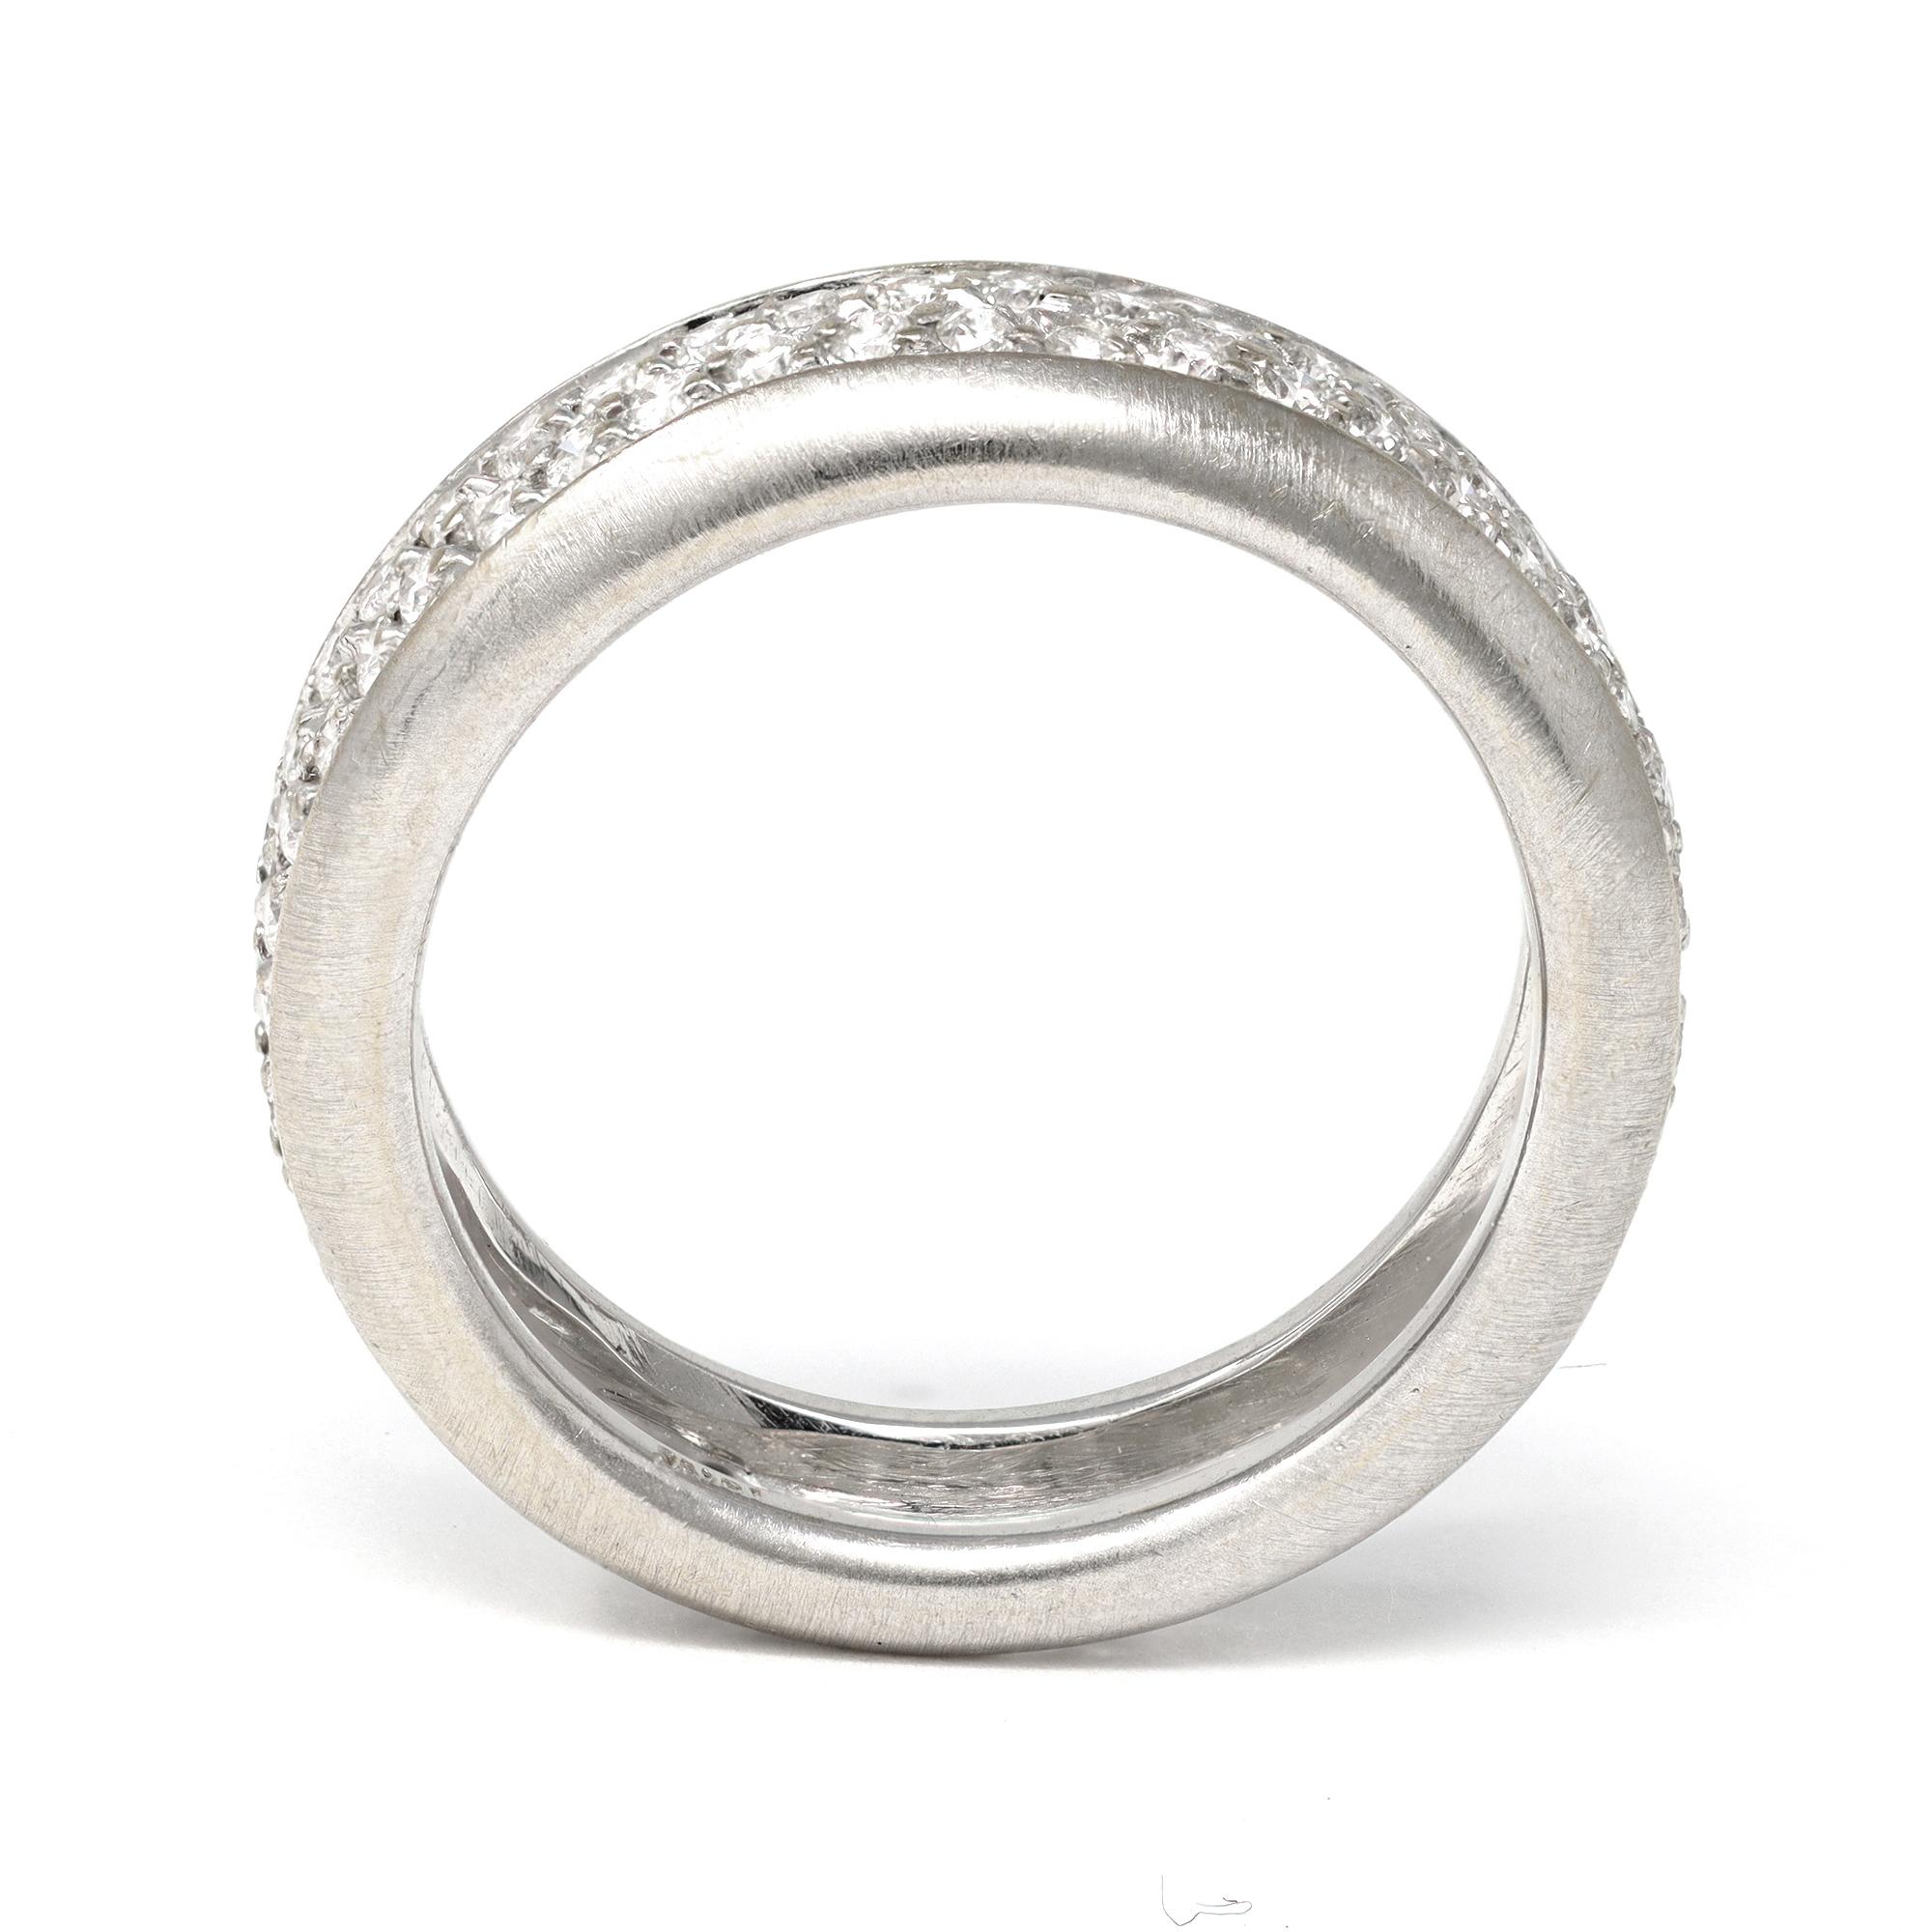 An eternity pavé  diamond band ring circa 1980, set in 18K white gold with a fine brush mat finish, Circa 1980. This modern ring features pavé round diamonds with an estimated weight of 0.70 carats, G color and VS clarity. The band will fit a size 6